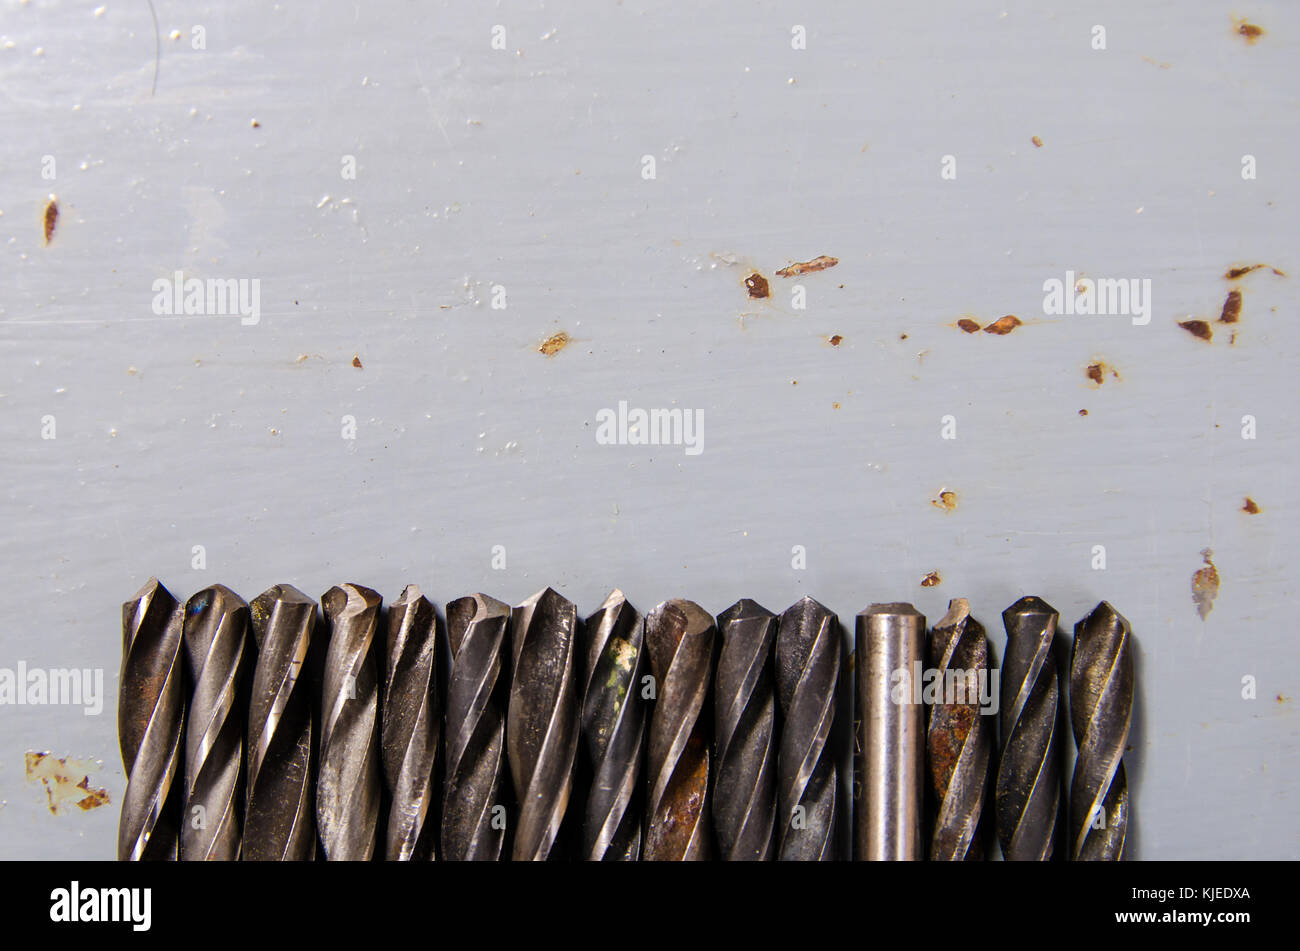 a lot of drills of different sizes on a painted metal background. concept of a different way of life. Stock Photo